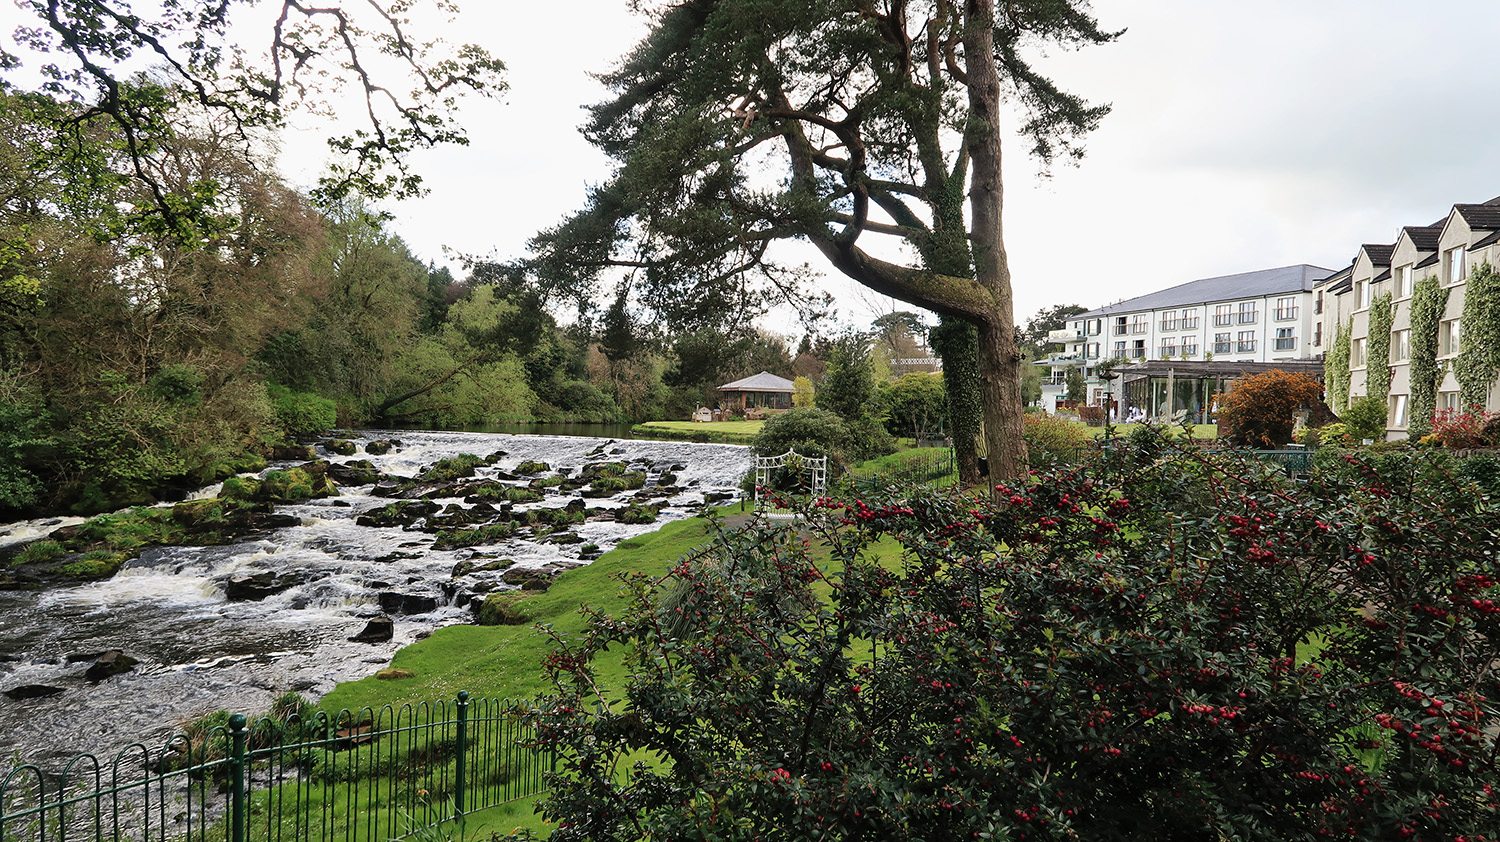 Tumbling river over rocks on the left and landscaped gardens and hotel on the right